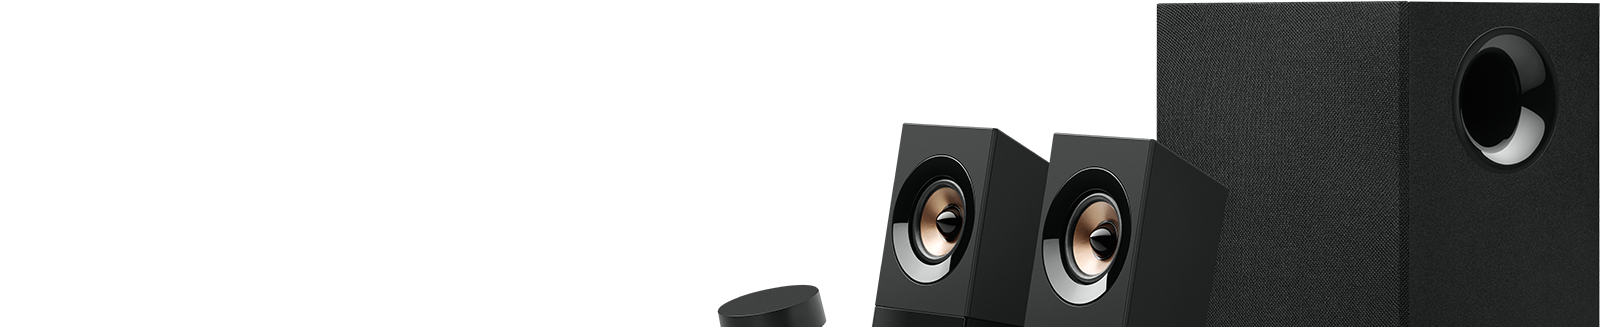 logitech pc speakers with subwoofer